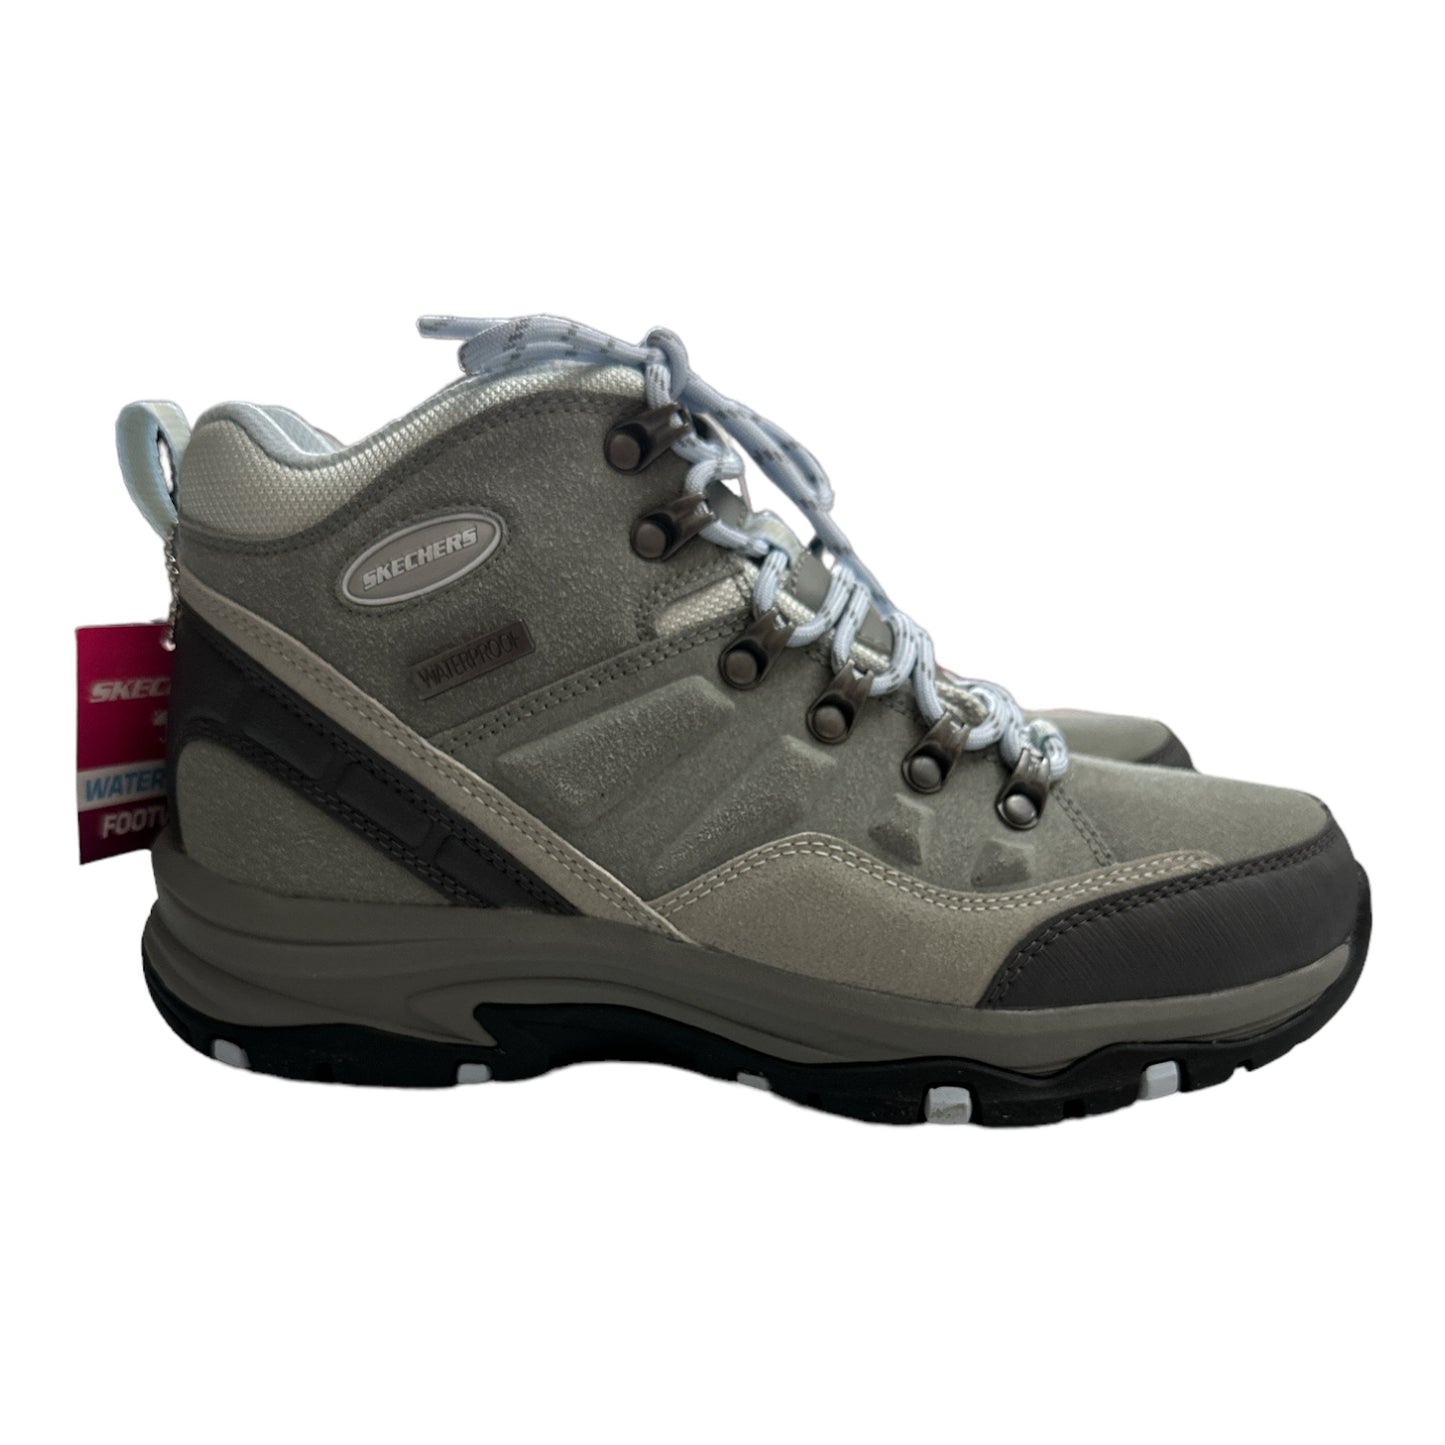 Skechers Women's Trego Outdoor Air Cooled Memory Foam Hiking Boots